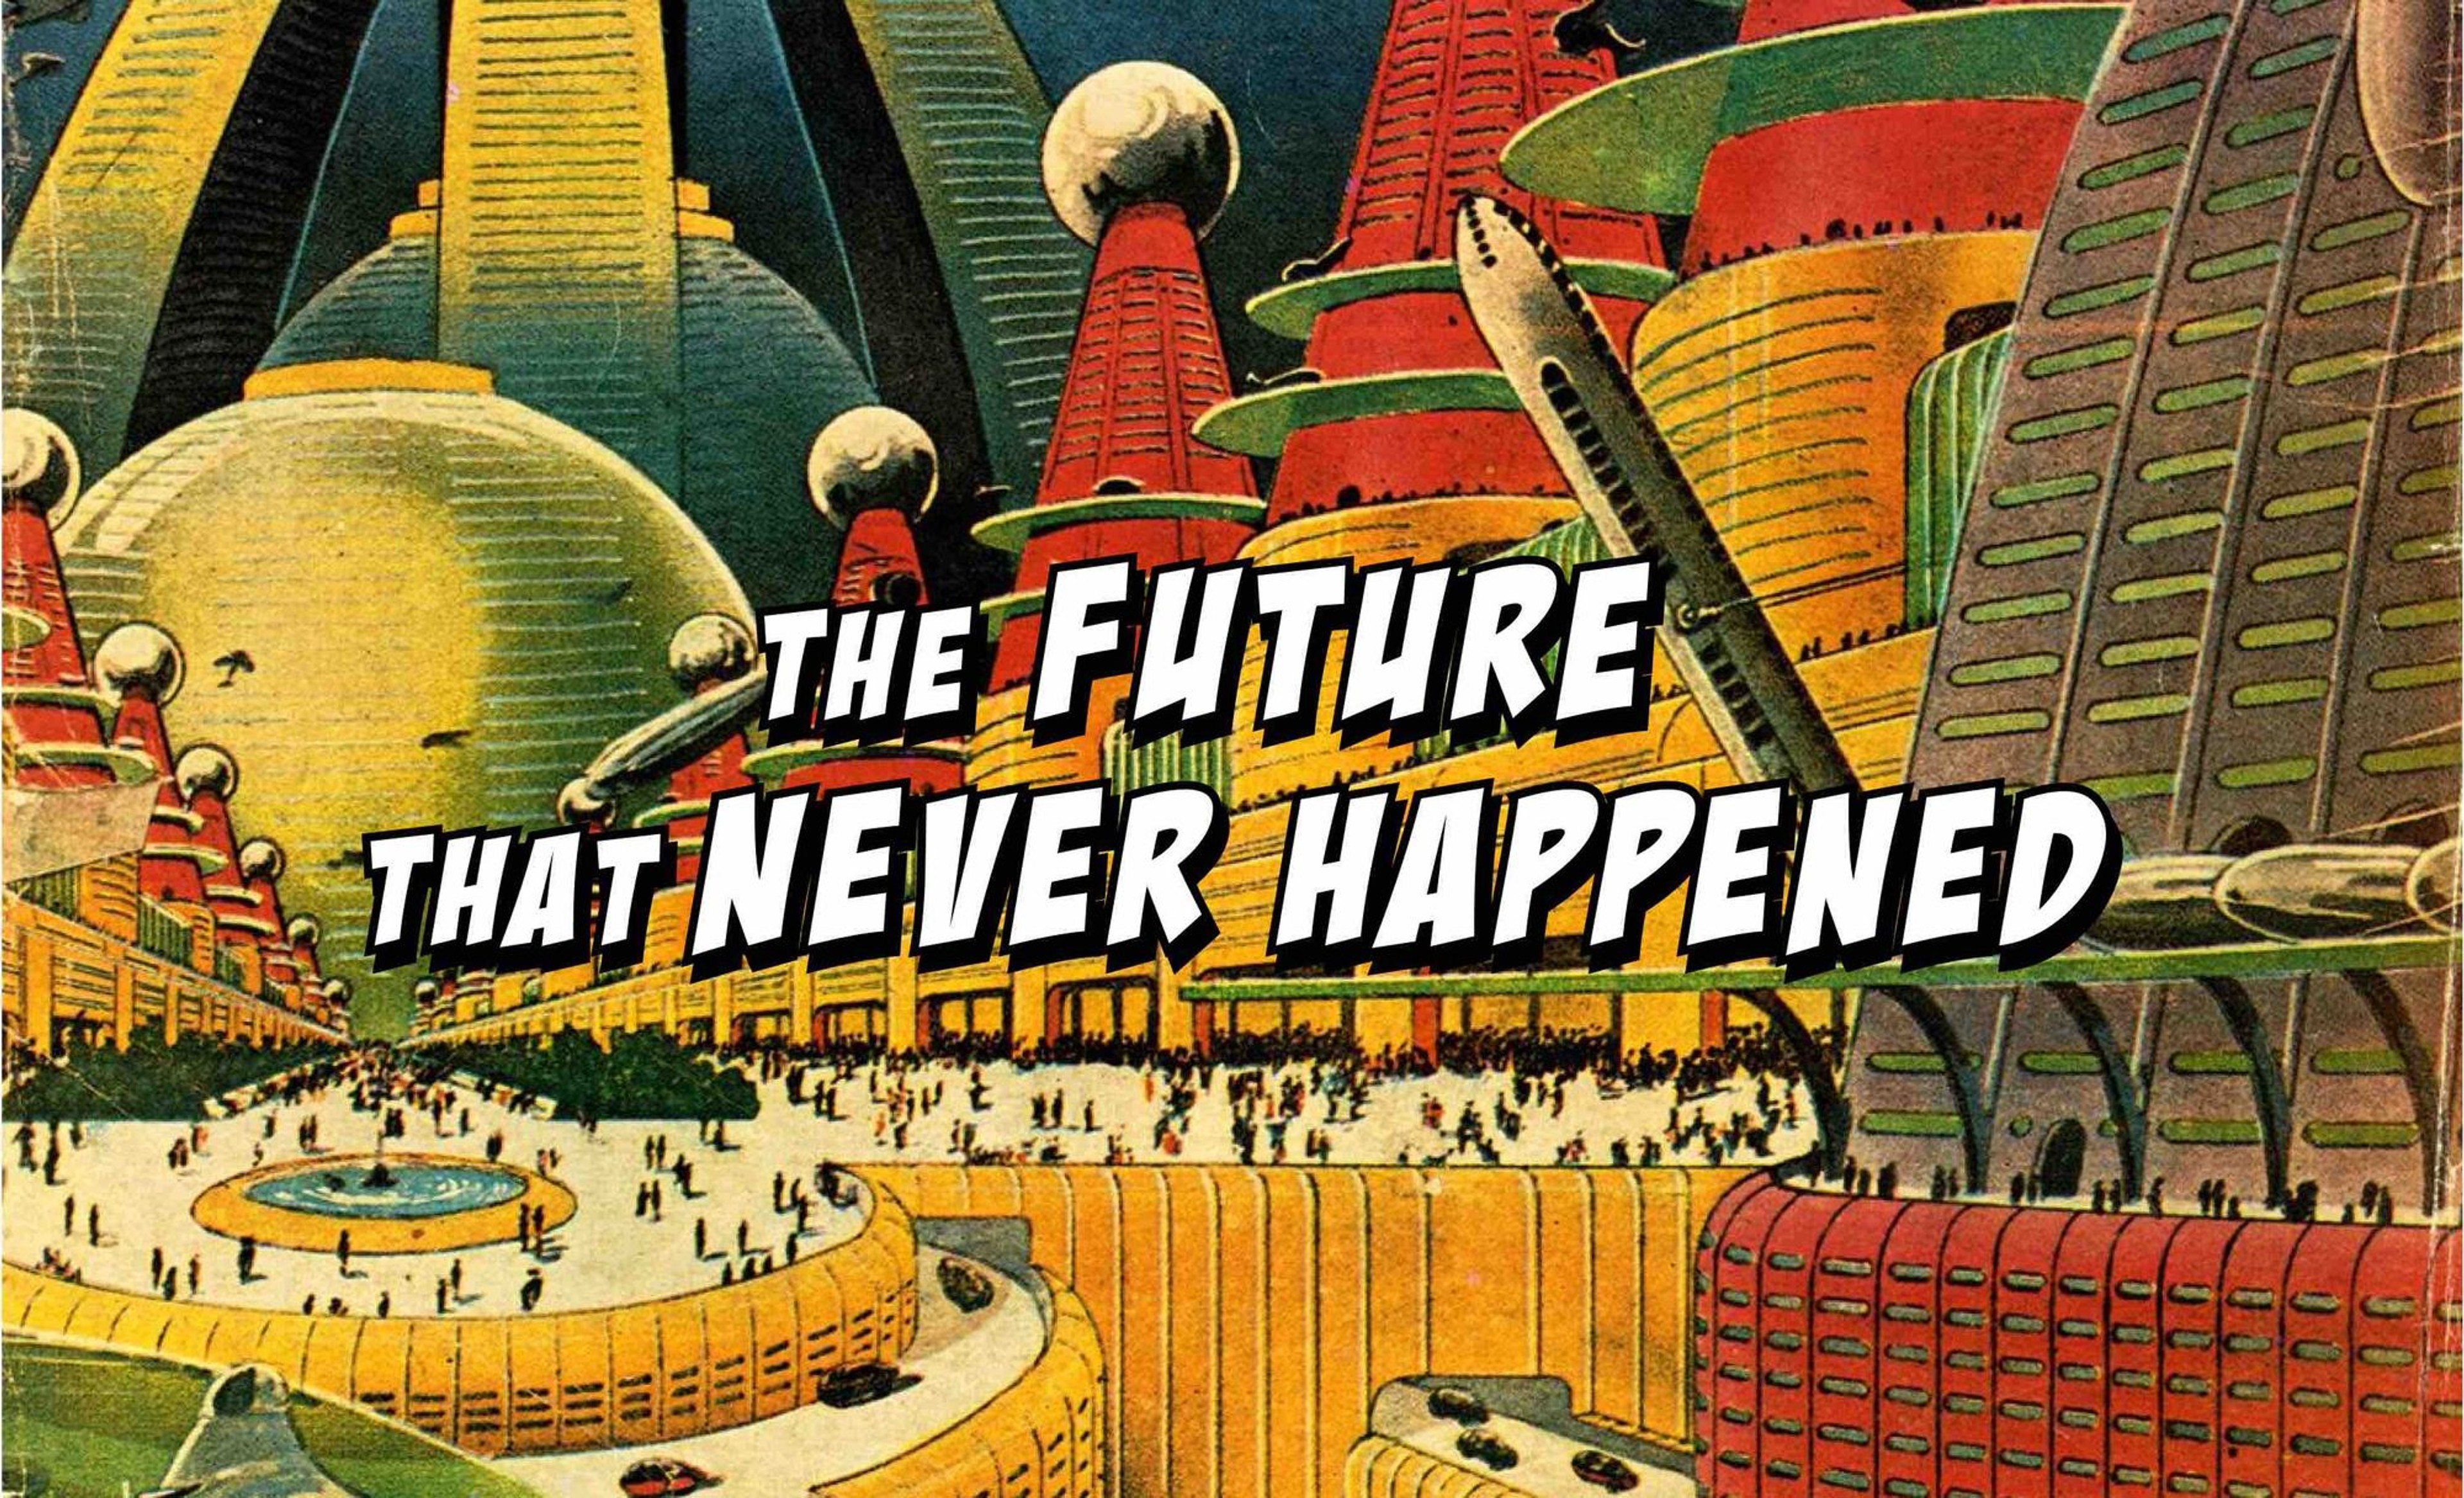 The future that has never happened